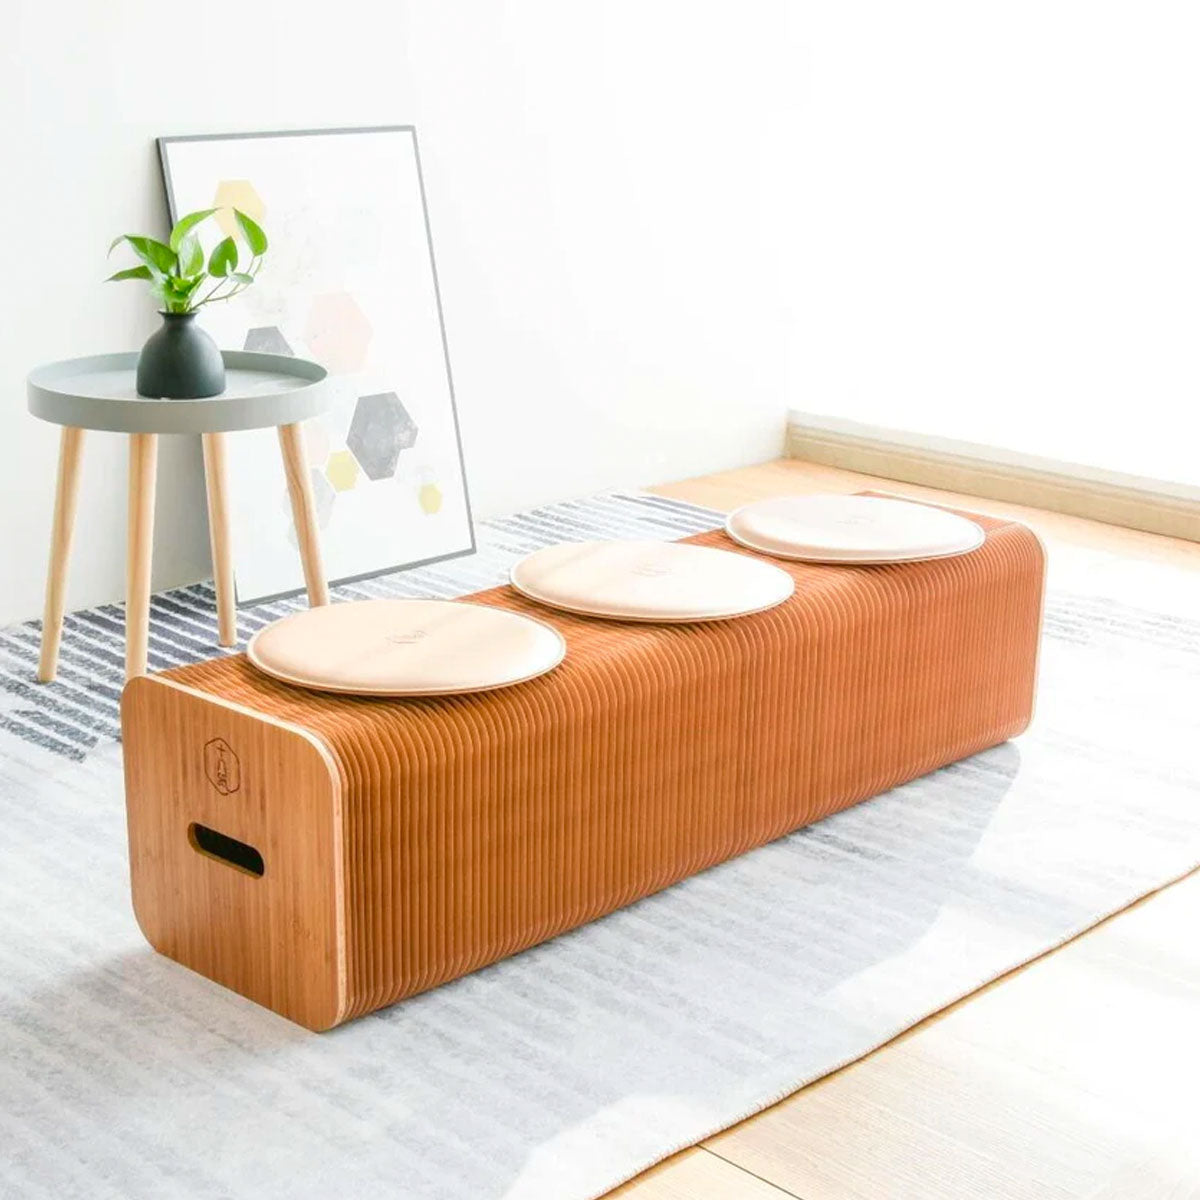 ihpaper Foldable 3 Seats Paper Bench